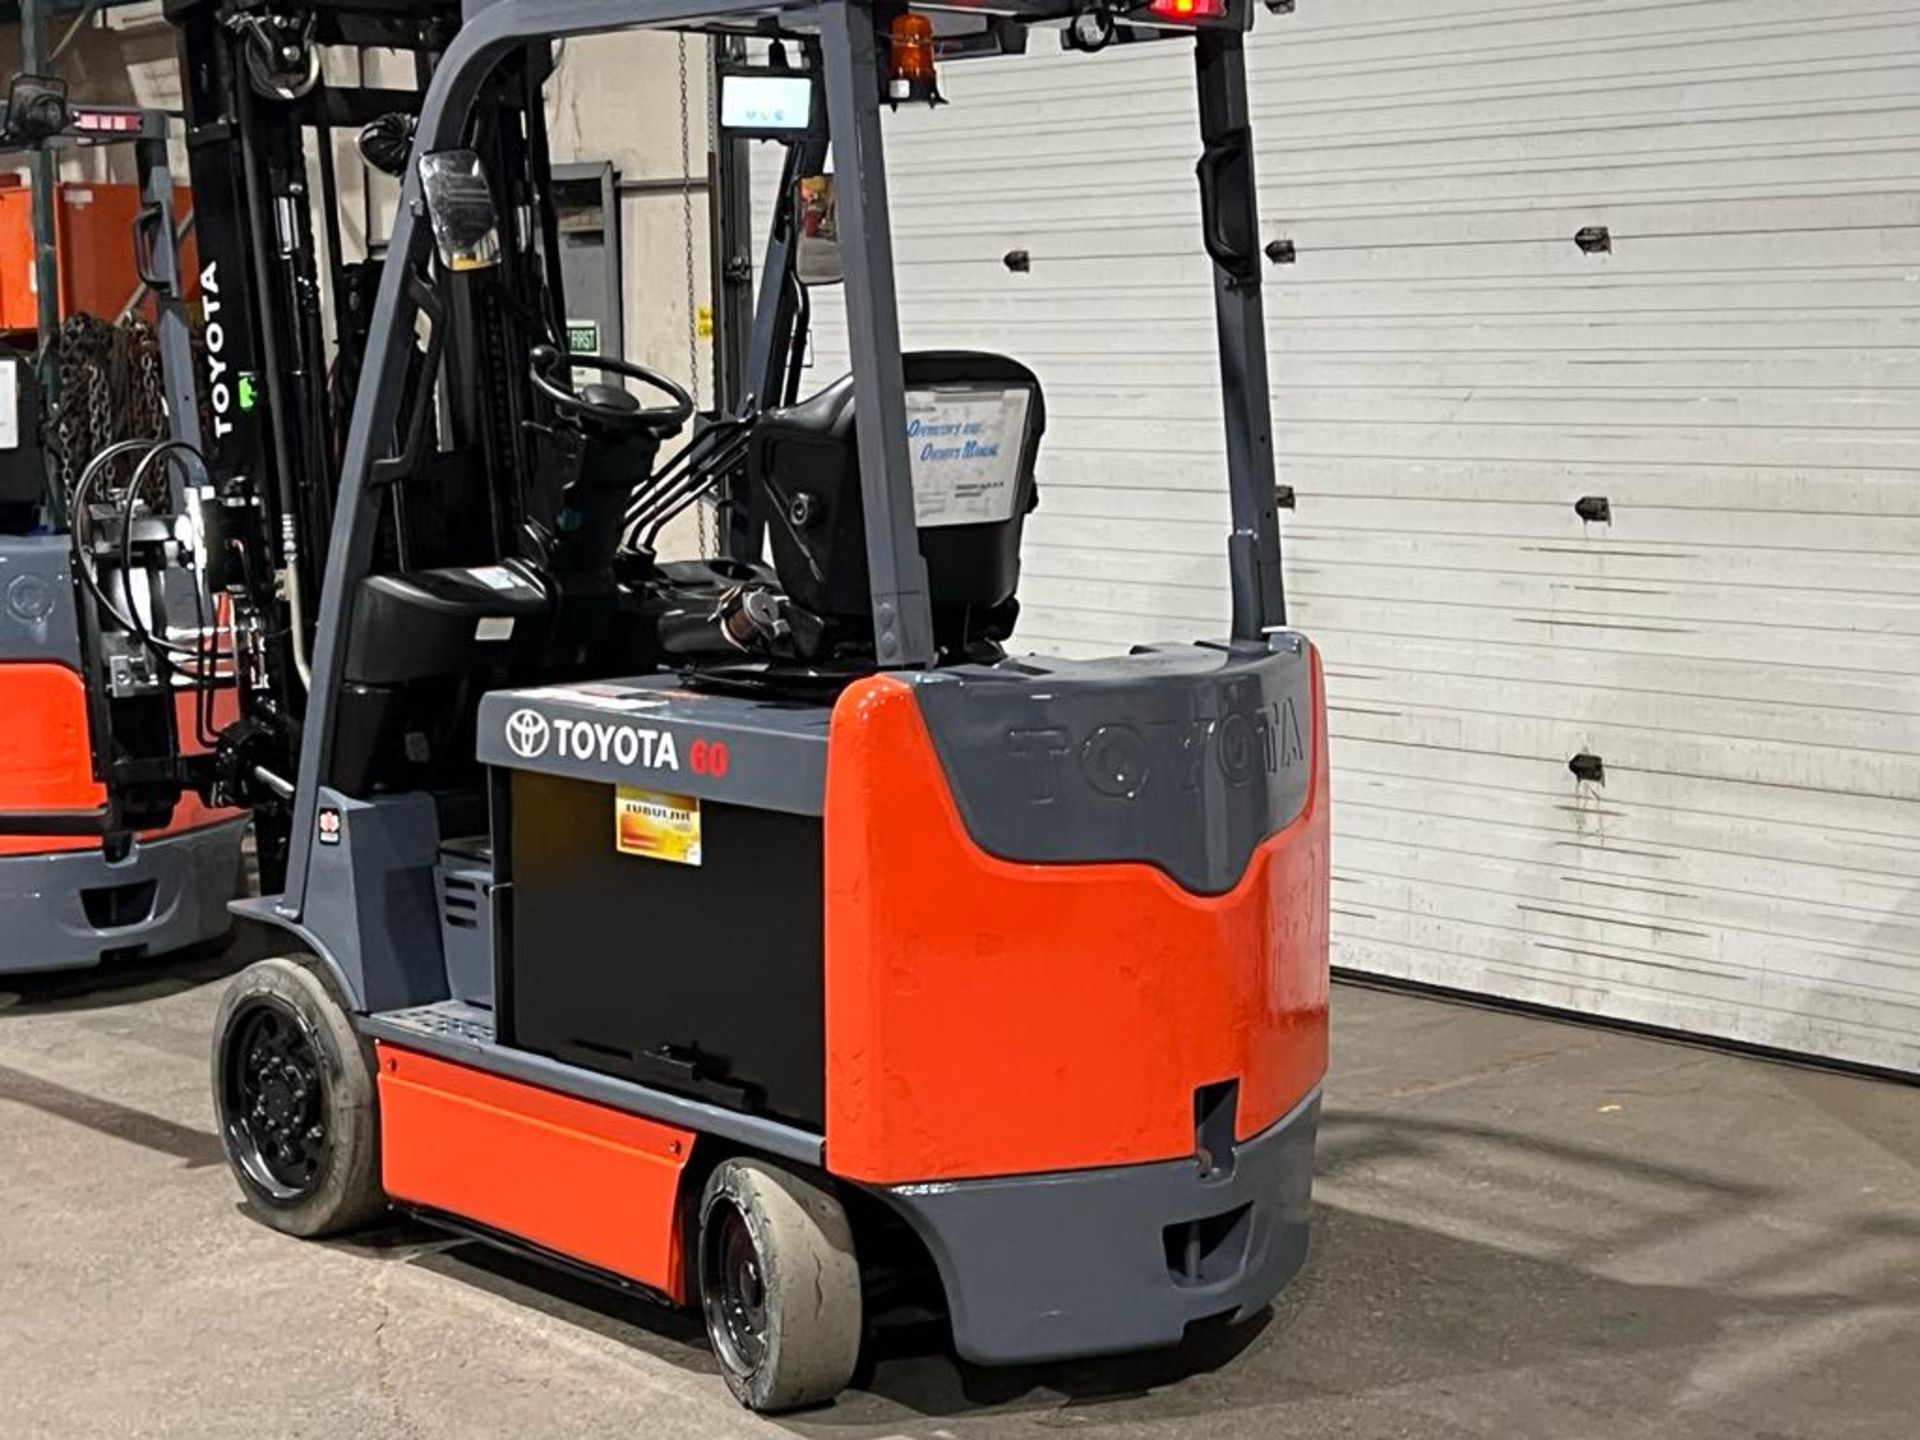 2019 Toyota 6,400lbs Capacity Forklift Electric with NEW Sideshift & Fork Positioner with 3-STAGE - Image 3 of 4